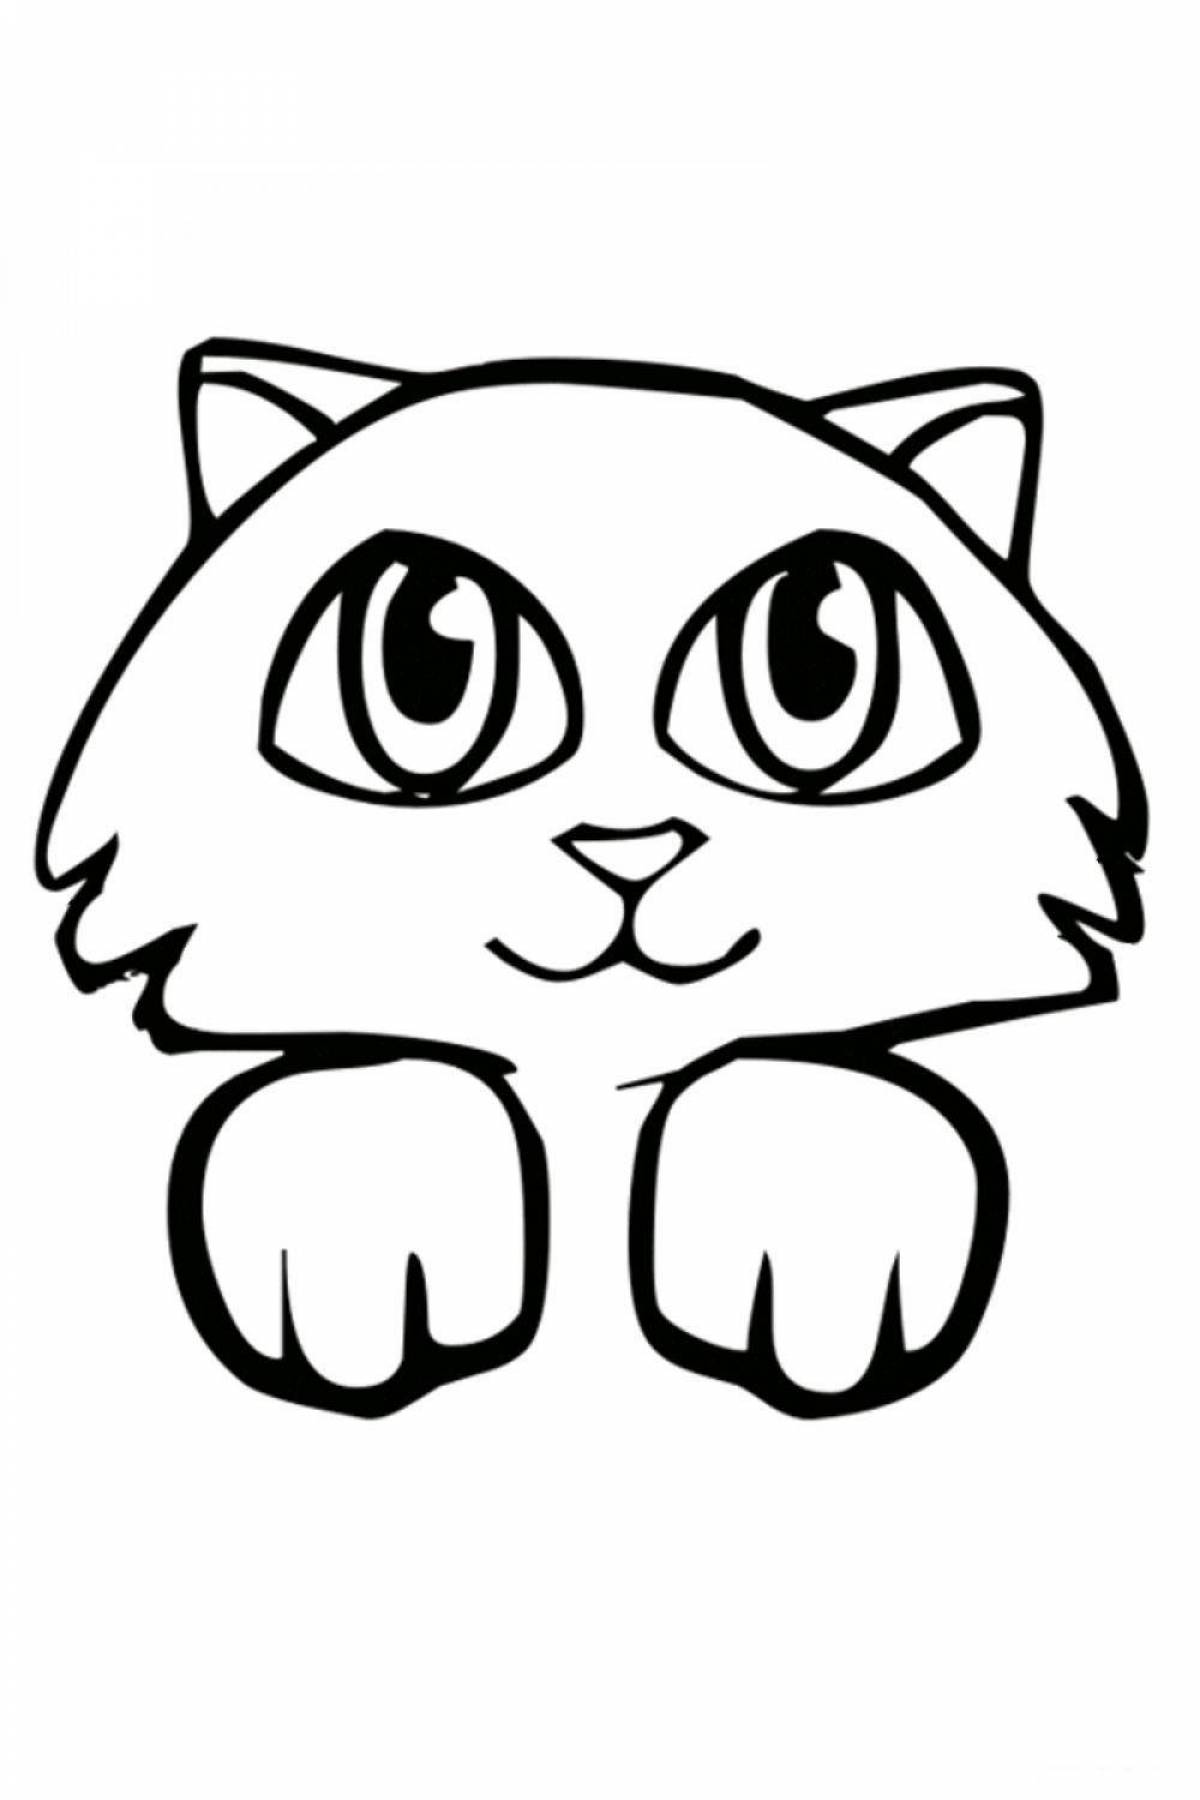 Snuggie kitten coloring page